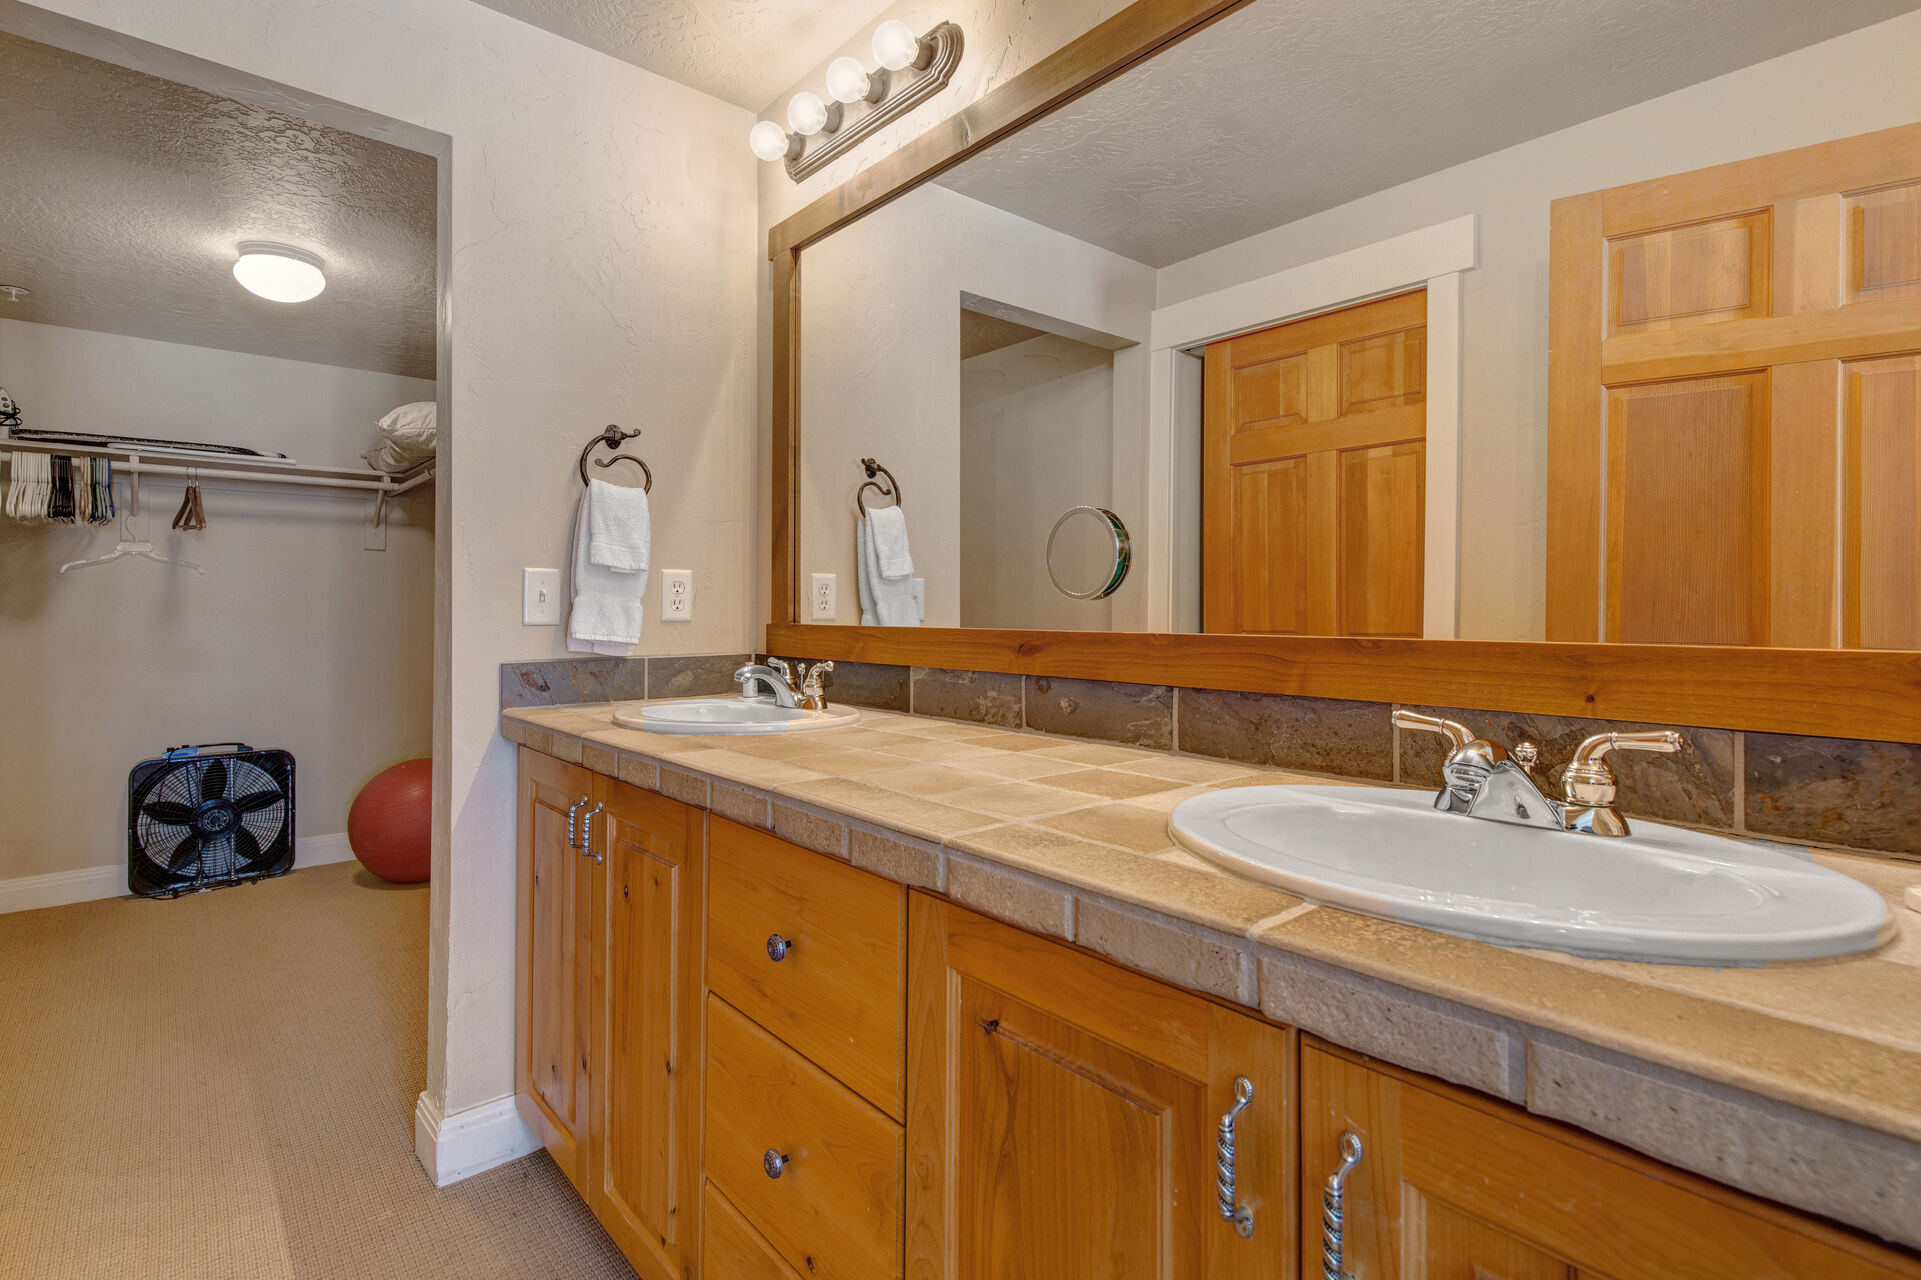 Master Bathroom with dual vanities, walk-in closet, large soaking tub, and separate tiled shower